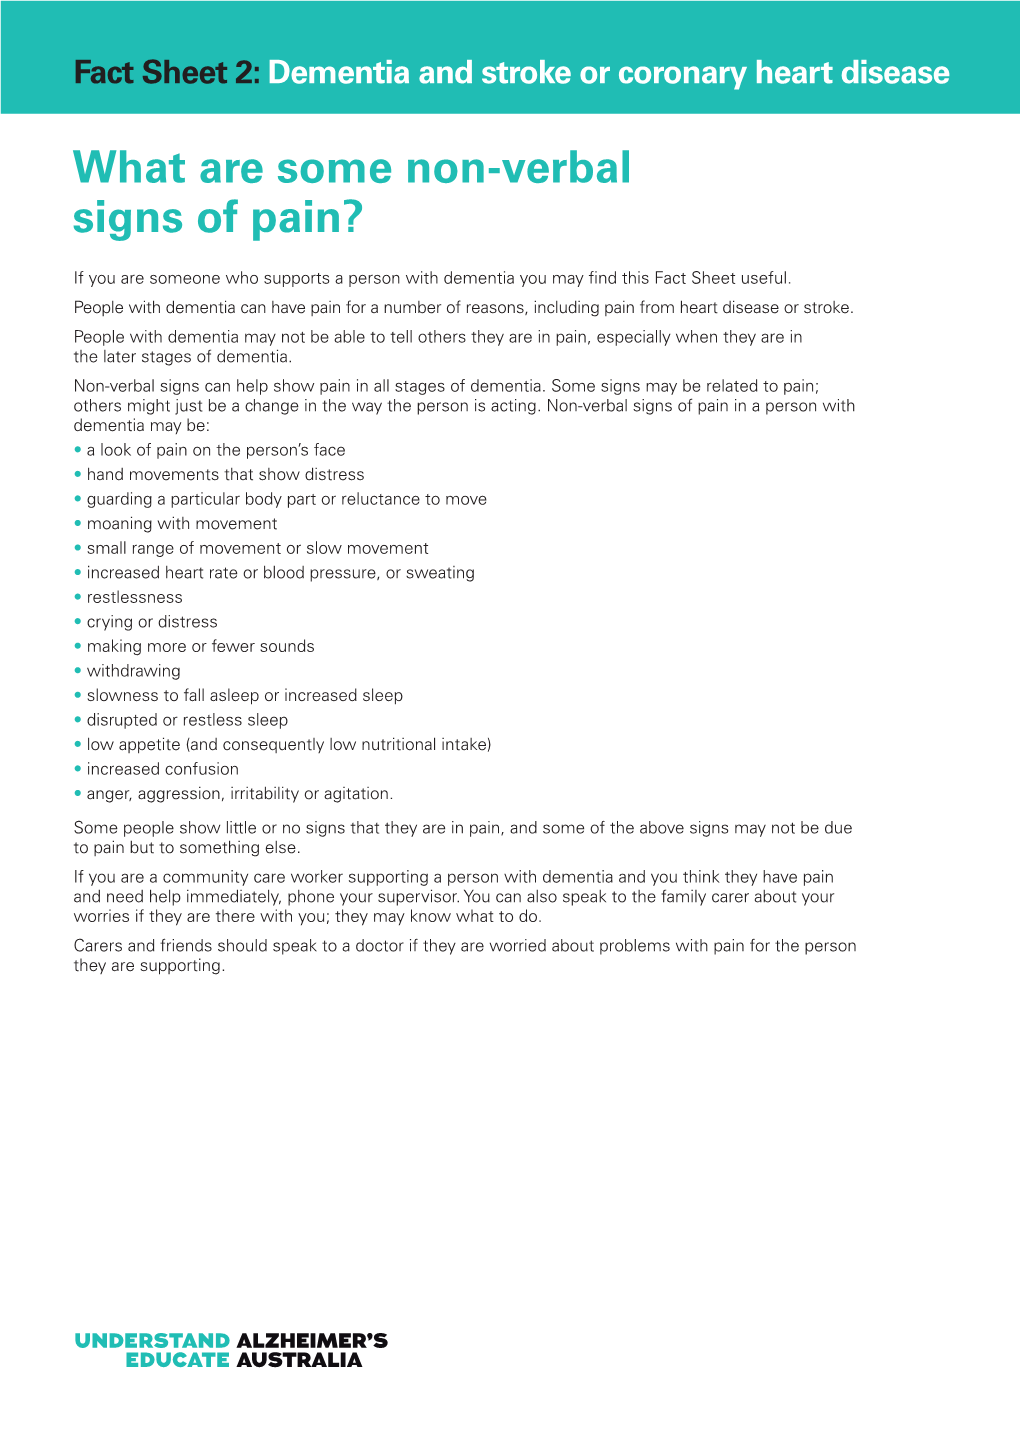 What Are Some Non-Verbal Signs of Pain?